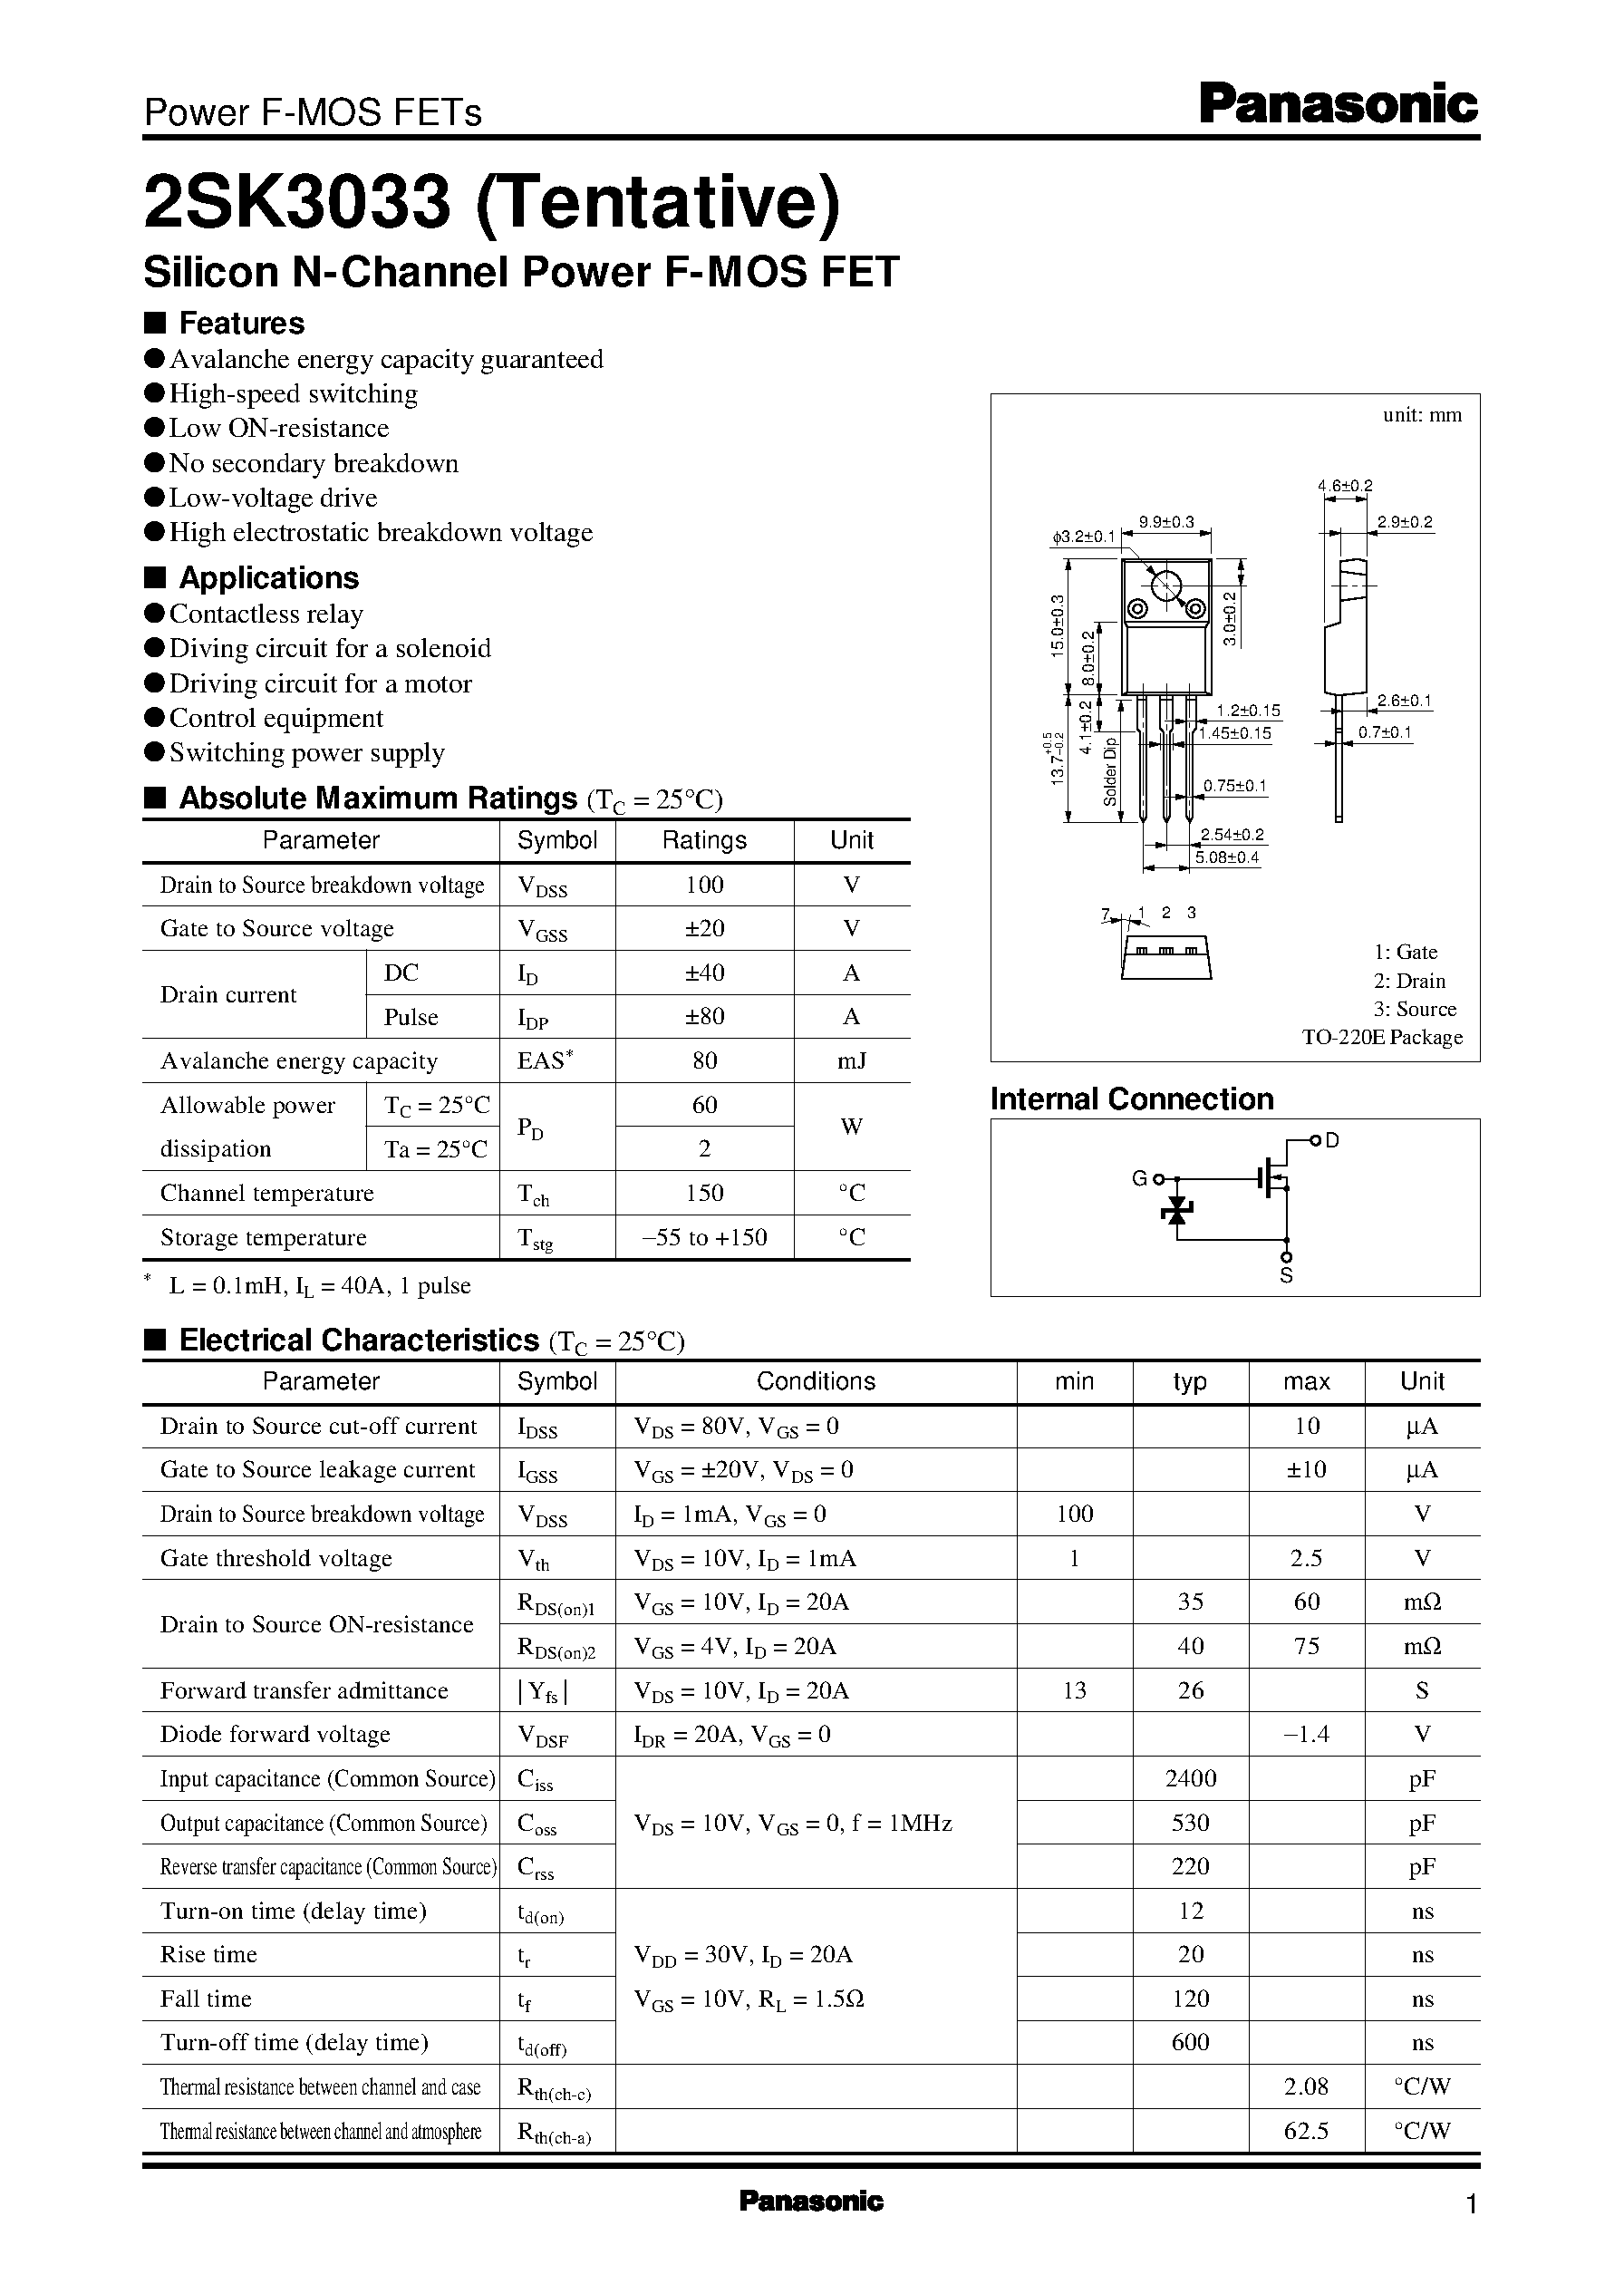 Datasheet 2SK3033 - Silicon N-Channel Power F-MOS FET page 1